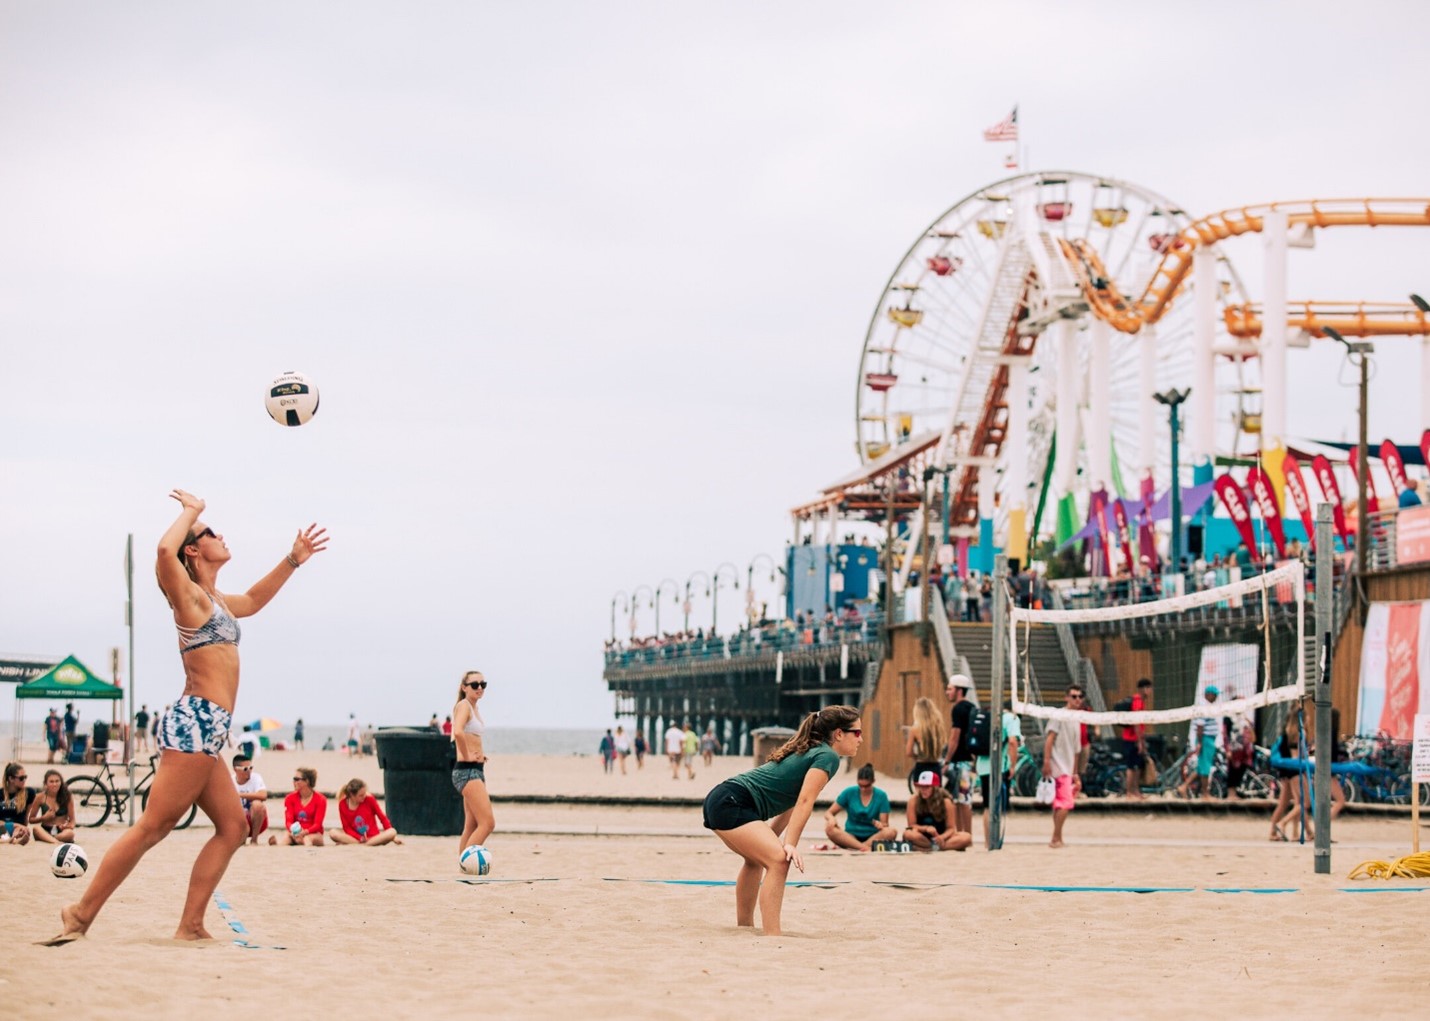 Beach Volleyball in South Bay: How It All Started